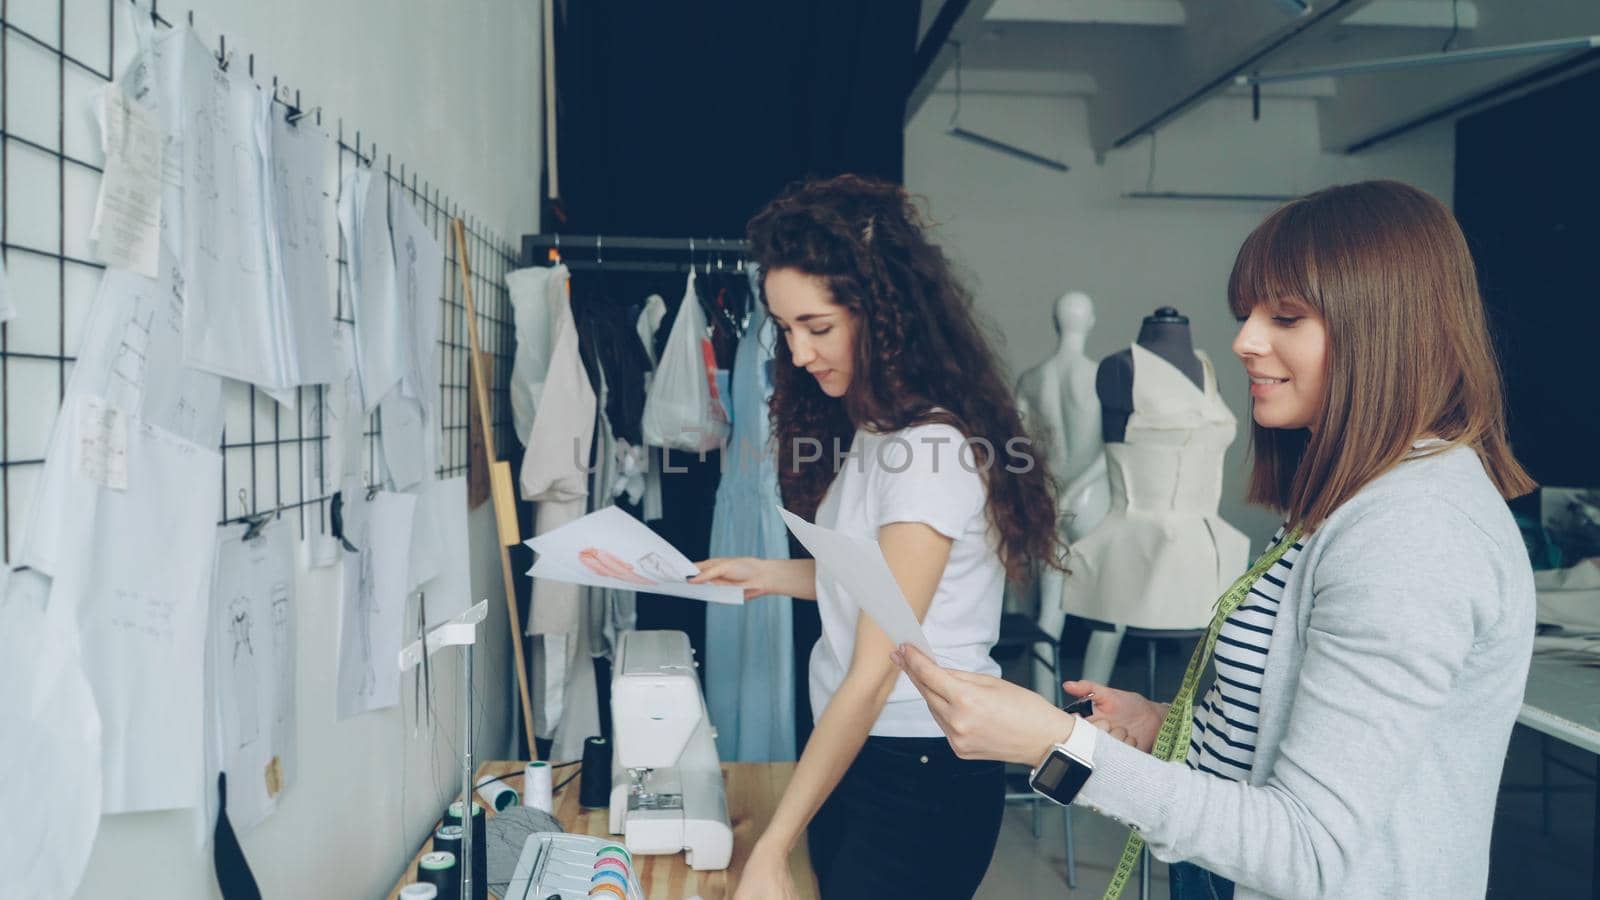 Attractive women clothing designers looking at garment sketches hanging on wall, discussing them, choosing new images for newest collection. Friendly informal atmosphere. by silverkblack